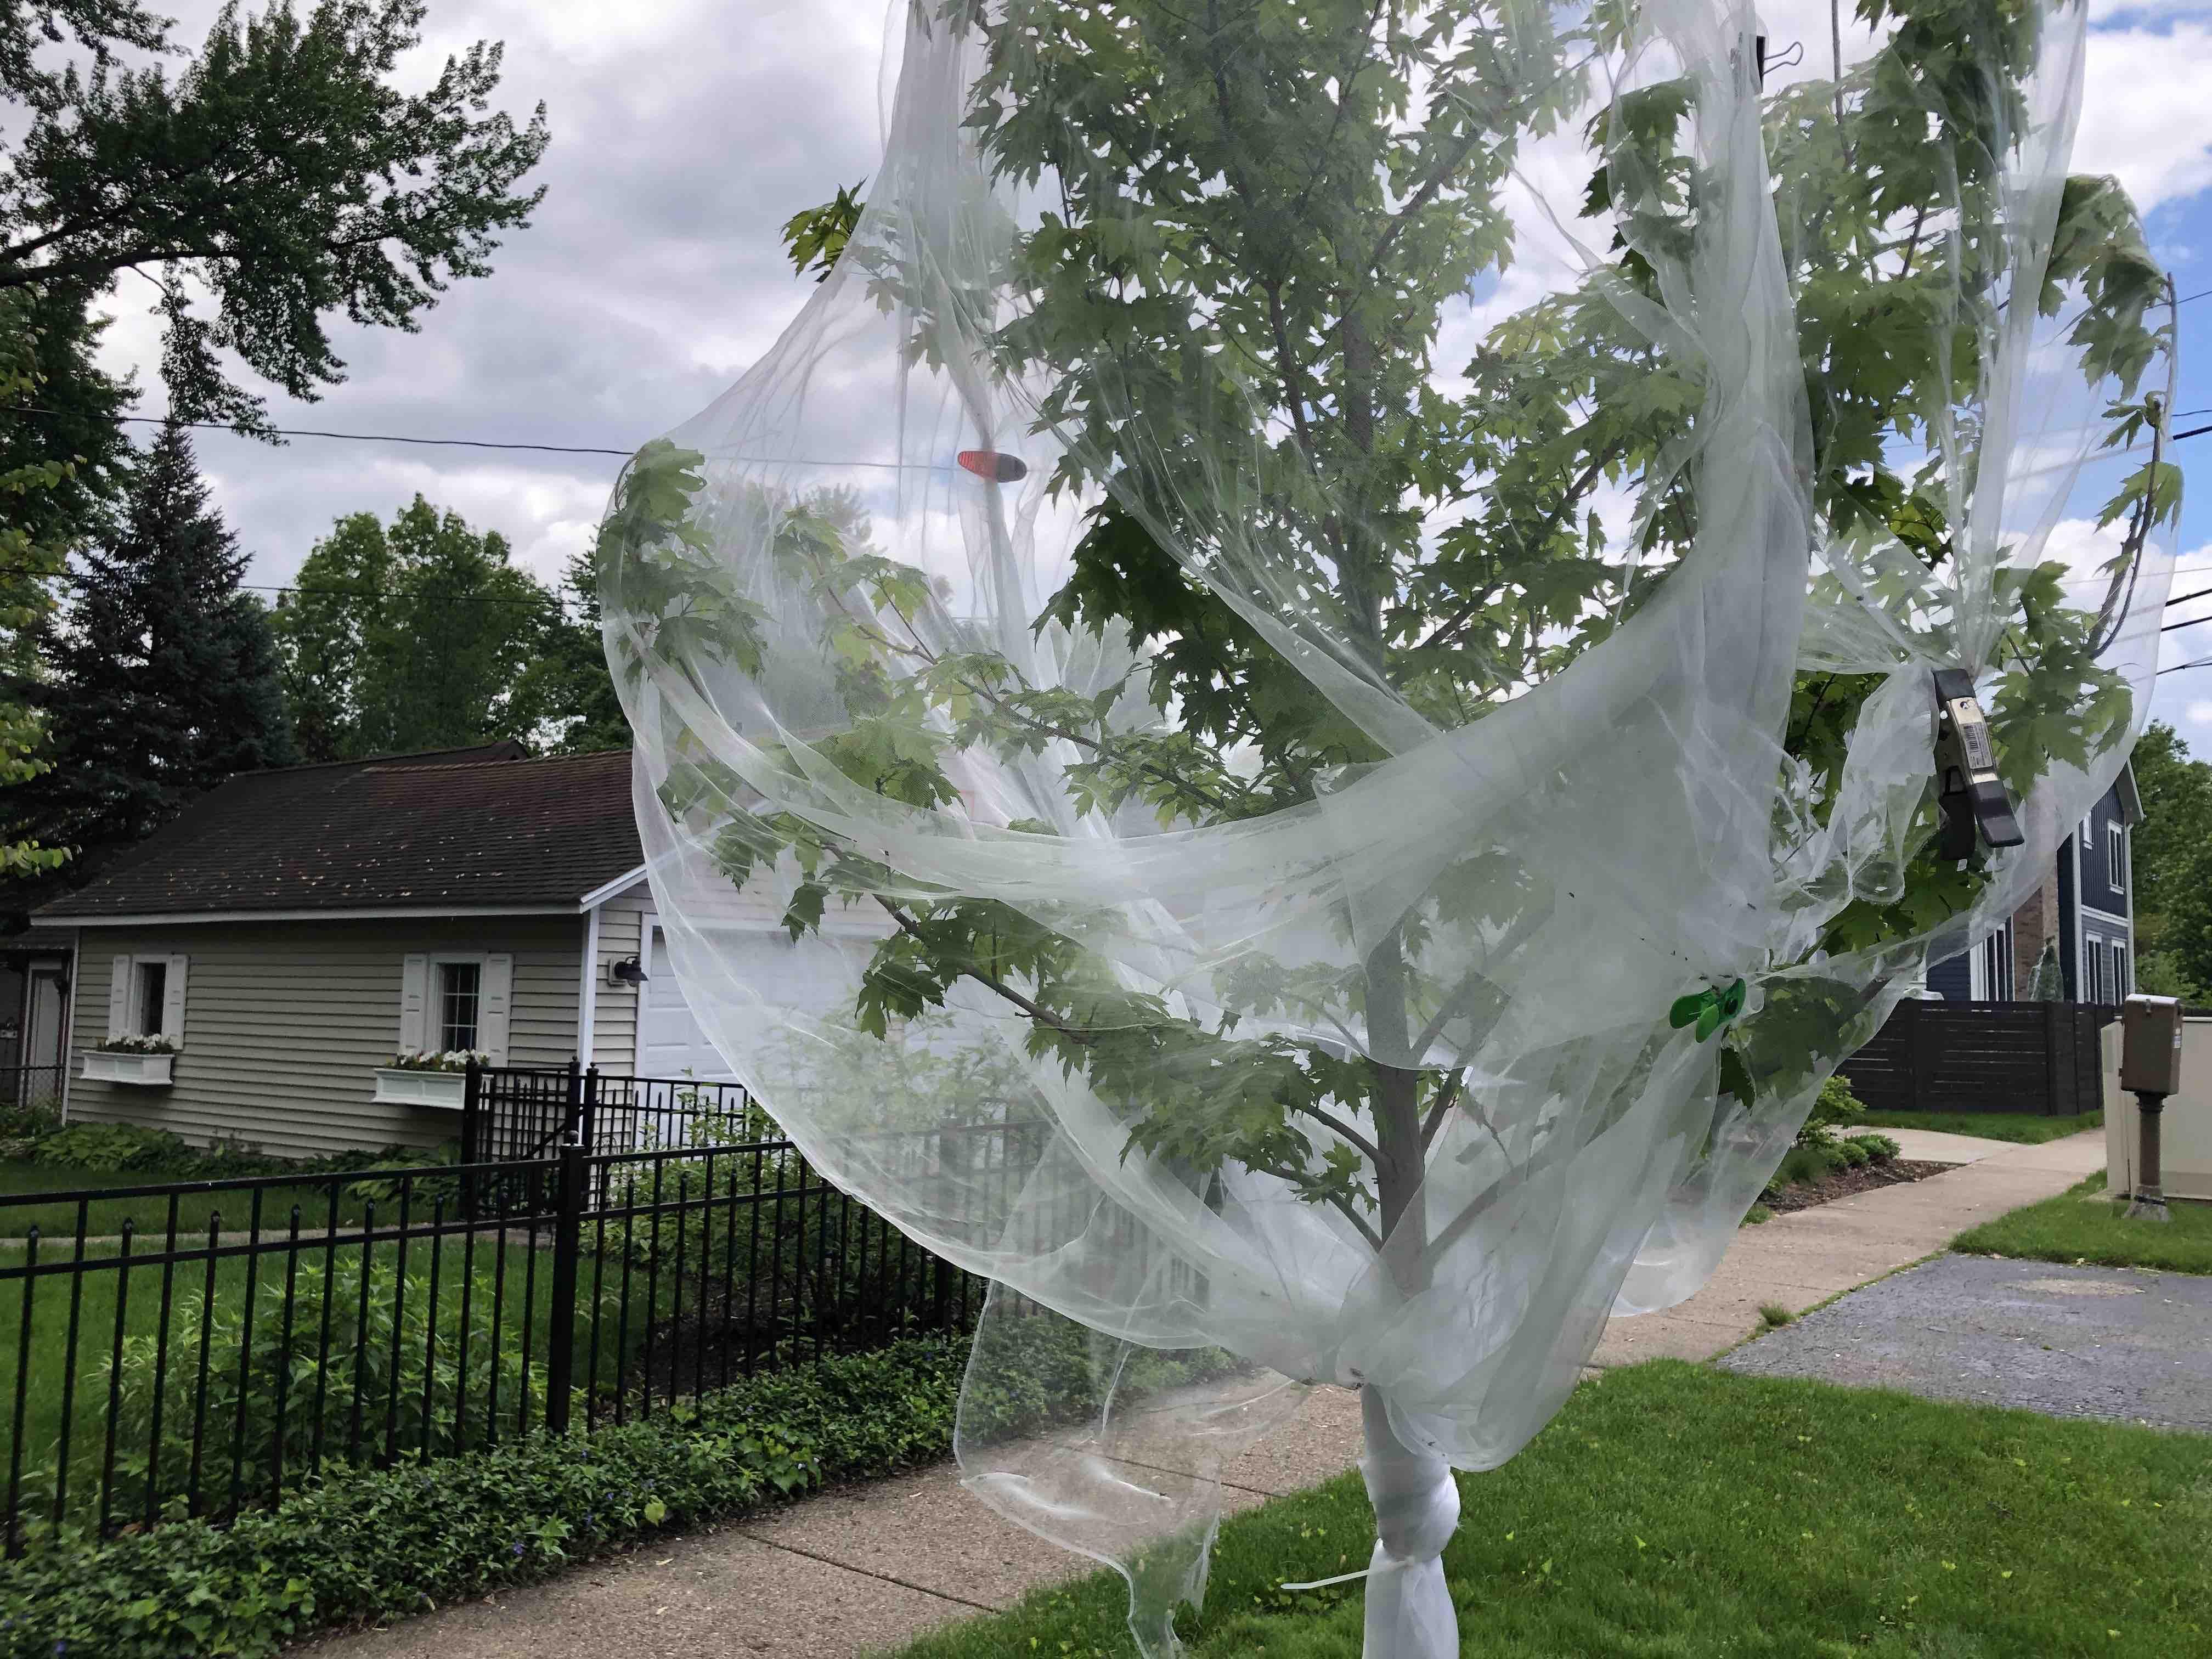 Residents in Elmhurst are wrapping their young trees to protect them from cicadas. Female cicadas slice into tender branches to lay their eggs. (Nicole Cardos / WTTW News)